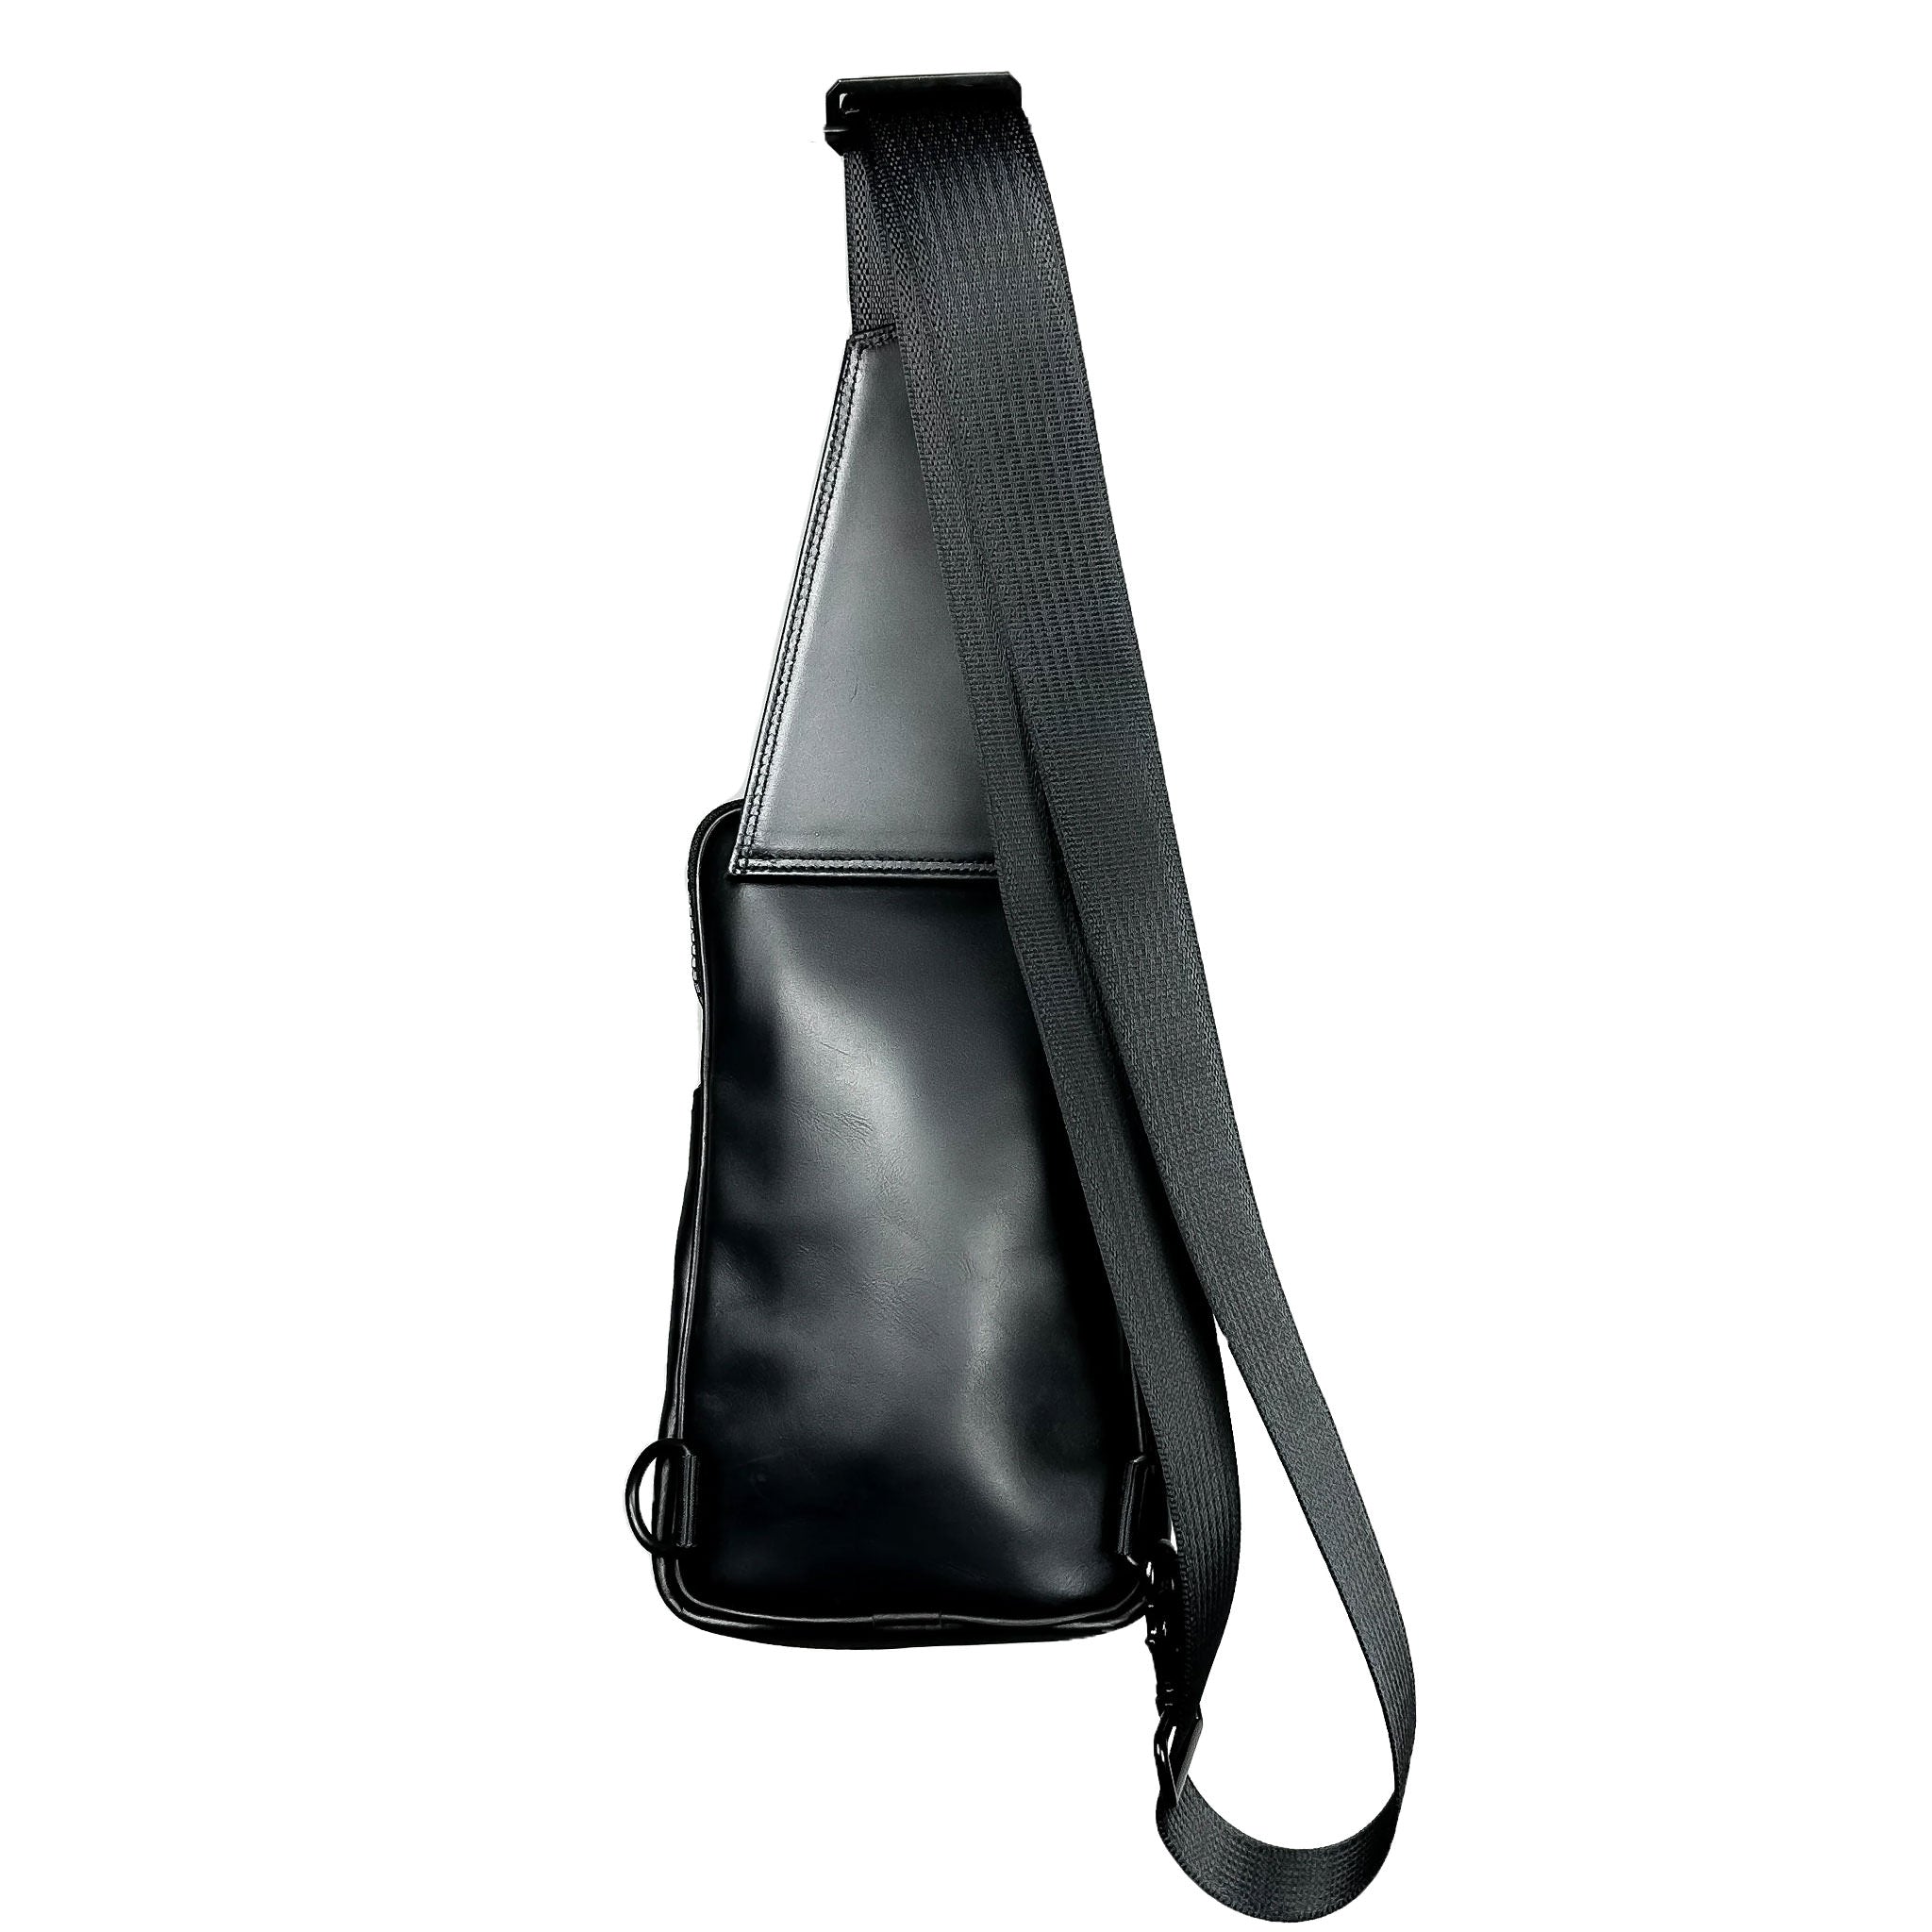 The back of a sling in black upcycled leather with a sleek finish on a white background.